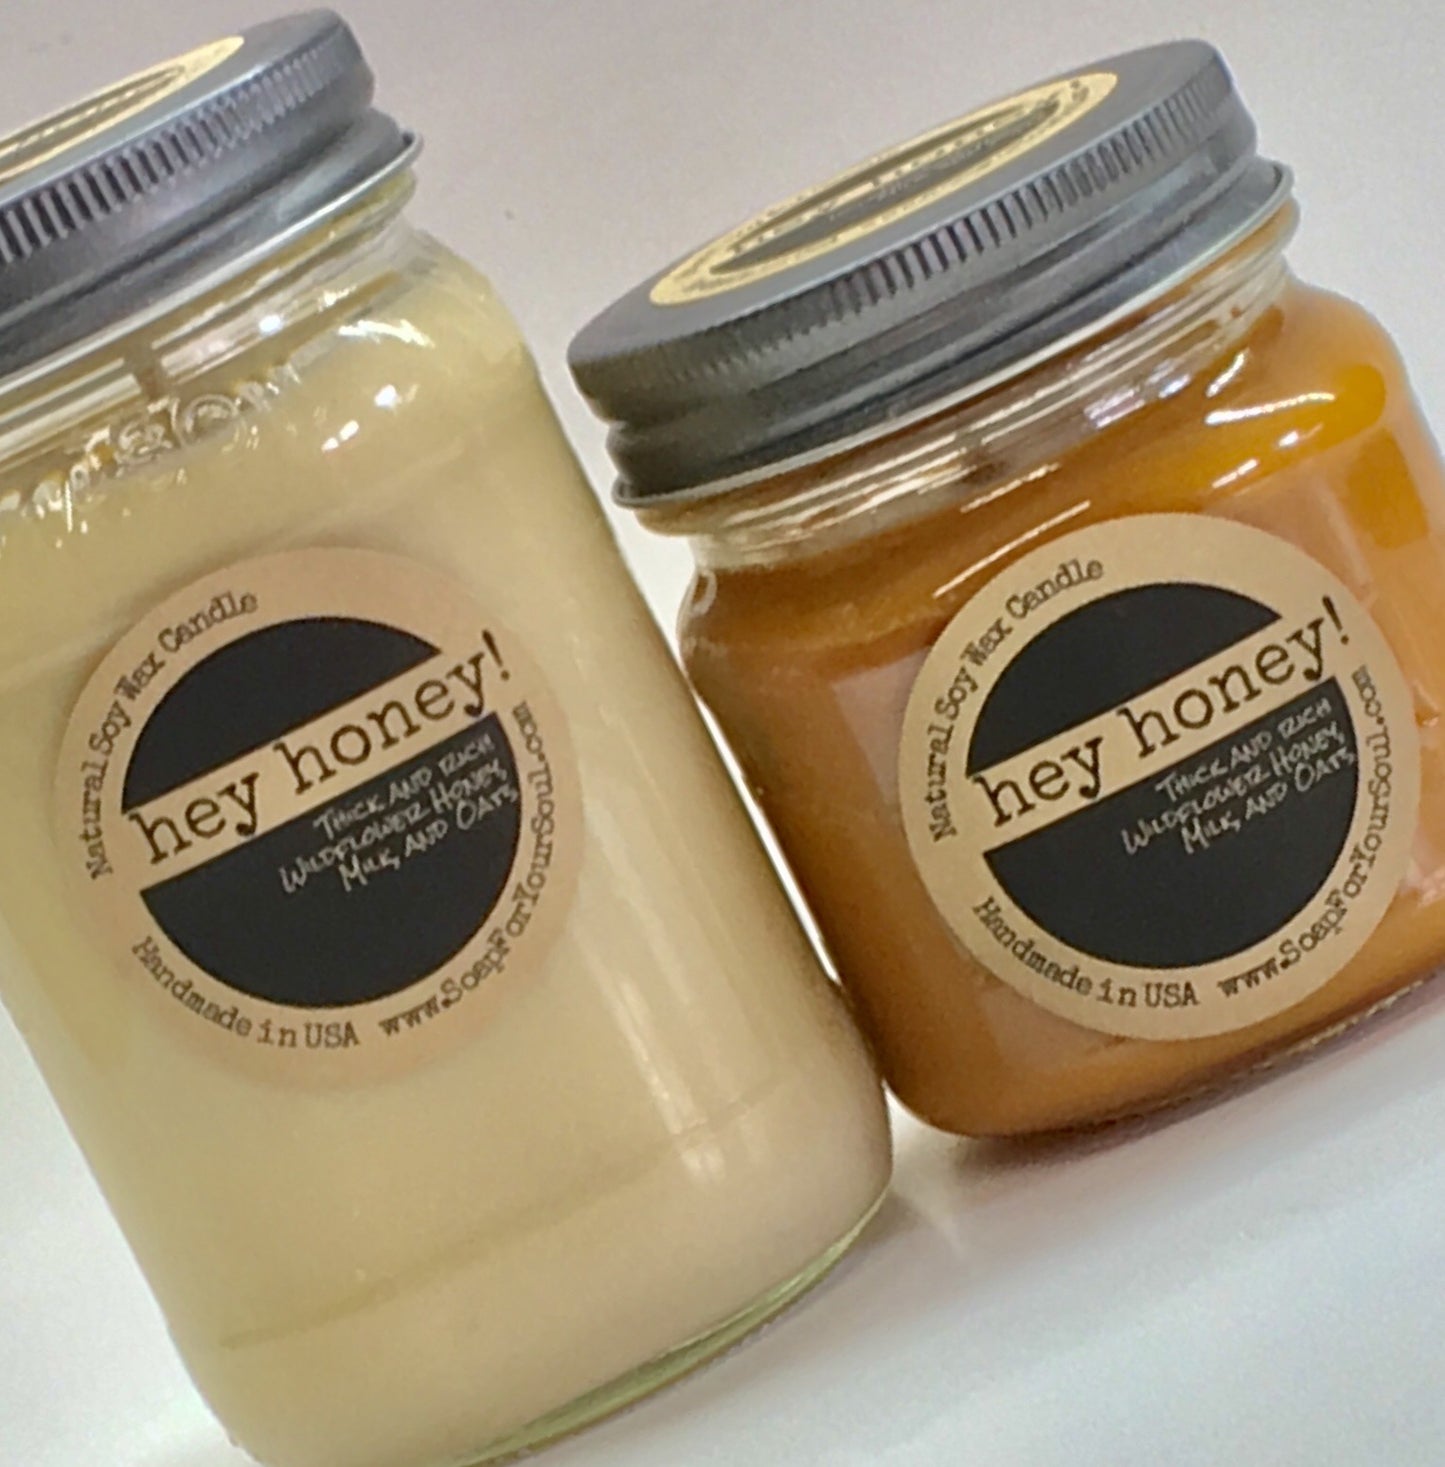 Hey Honey! Scented soy candles